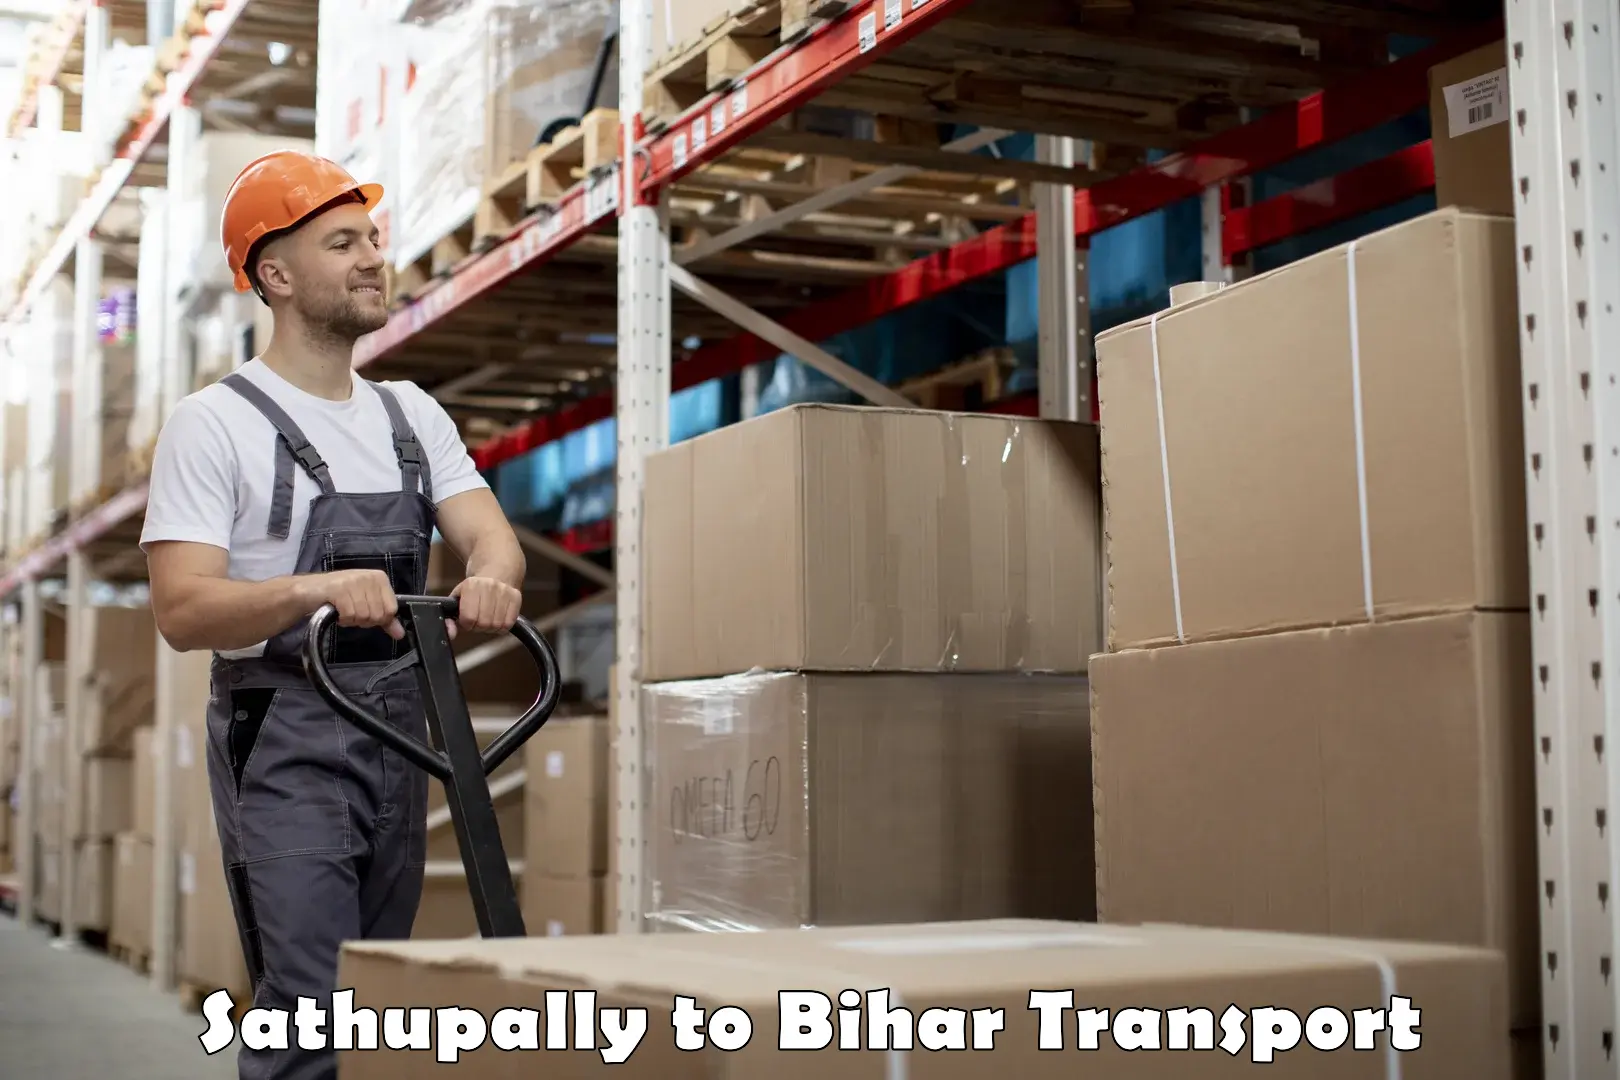 Part load transport service in India Sathupally to Bihar Sharif